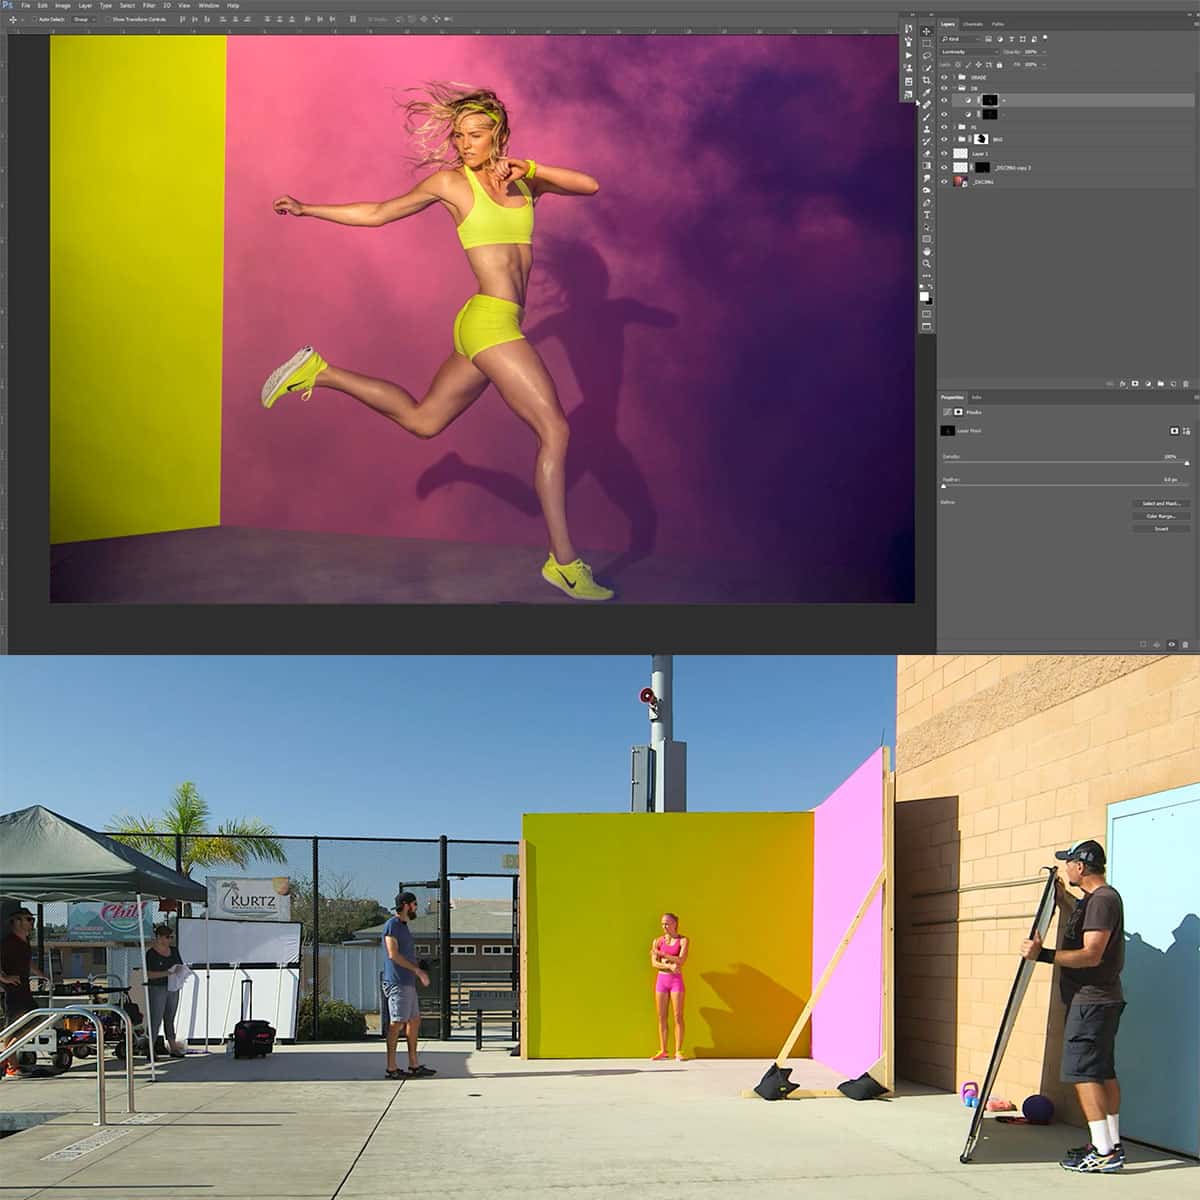 Sports Photography & Commercial Advertising Tutorial With Tim Tadder Tim Tadder PRO EDU